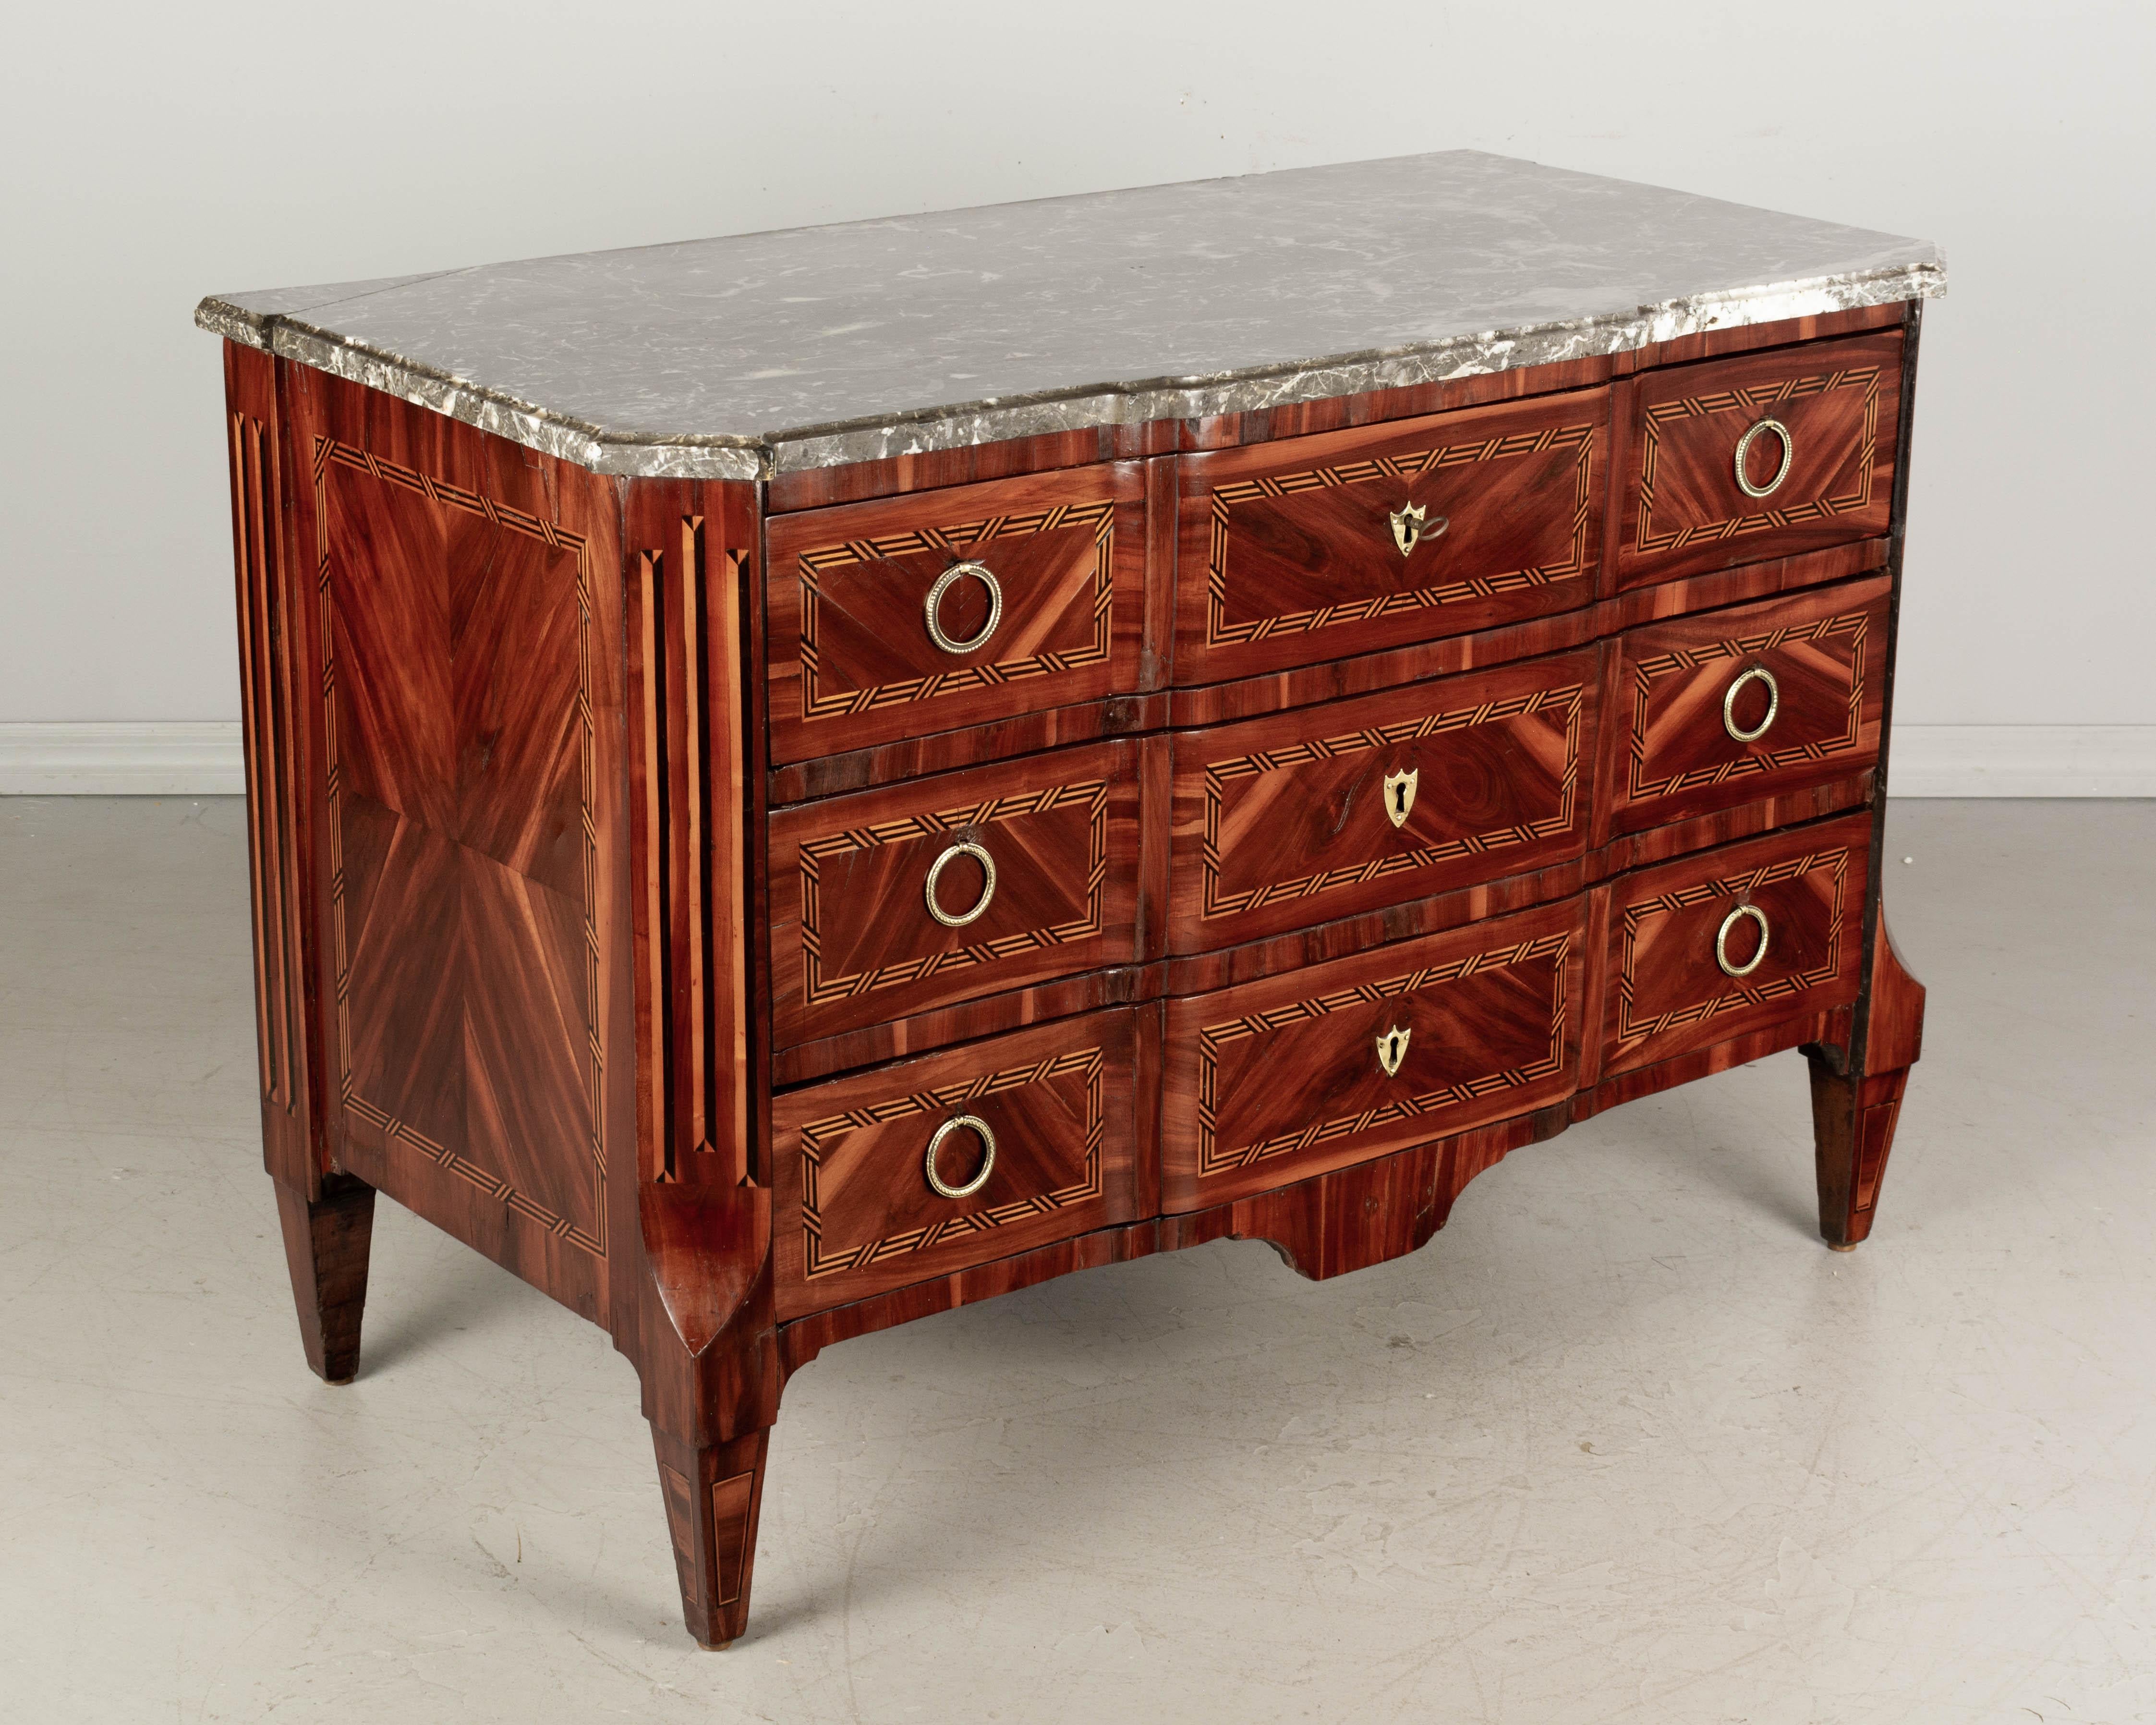 A fine 18th century French Louis XVI marquetry commode, or chest of drawers, with bookmatched and inlaid veneers of walnut, mahogany, cherry and ebony. Oak and pine as secondary woods. French polish finish with nice shiny luster. Three dovetailed